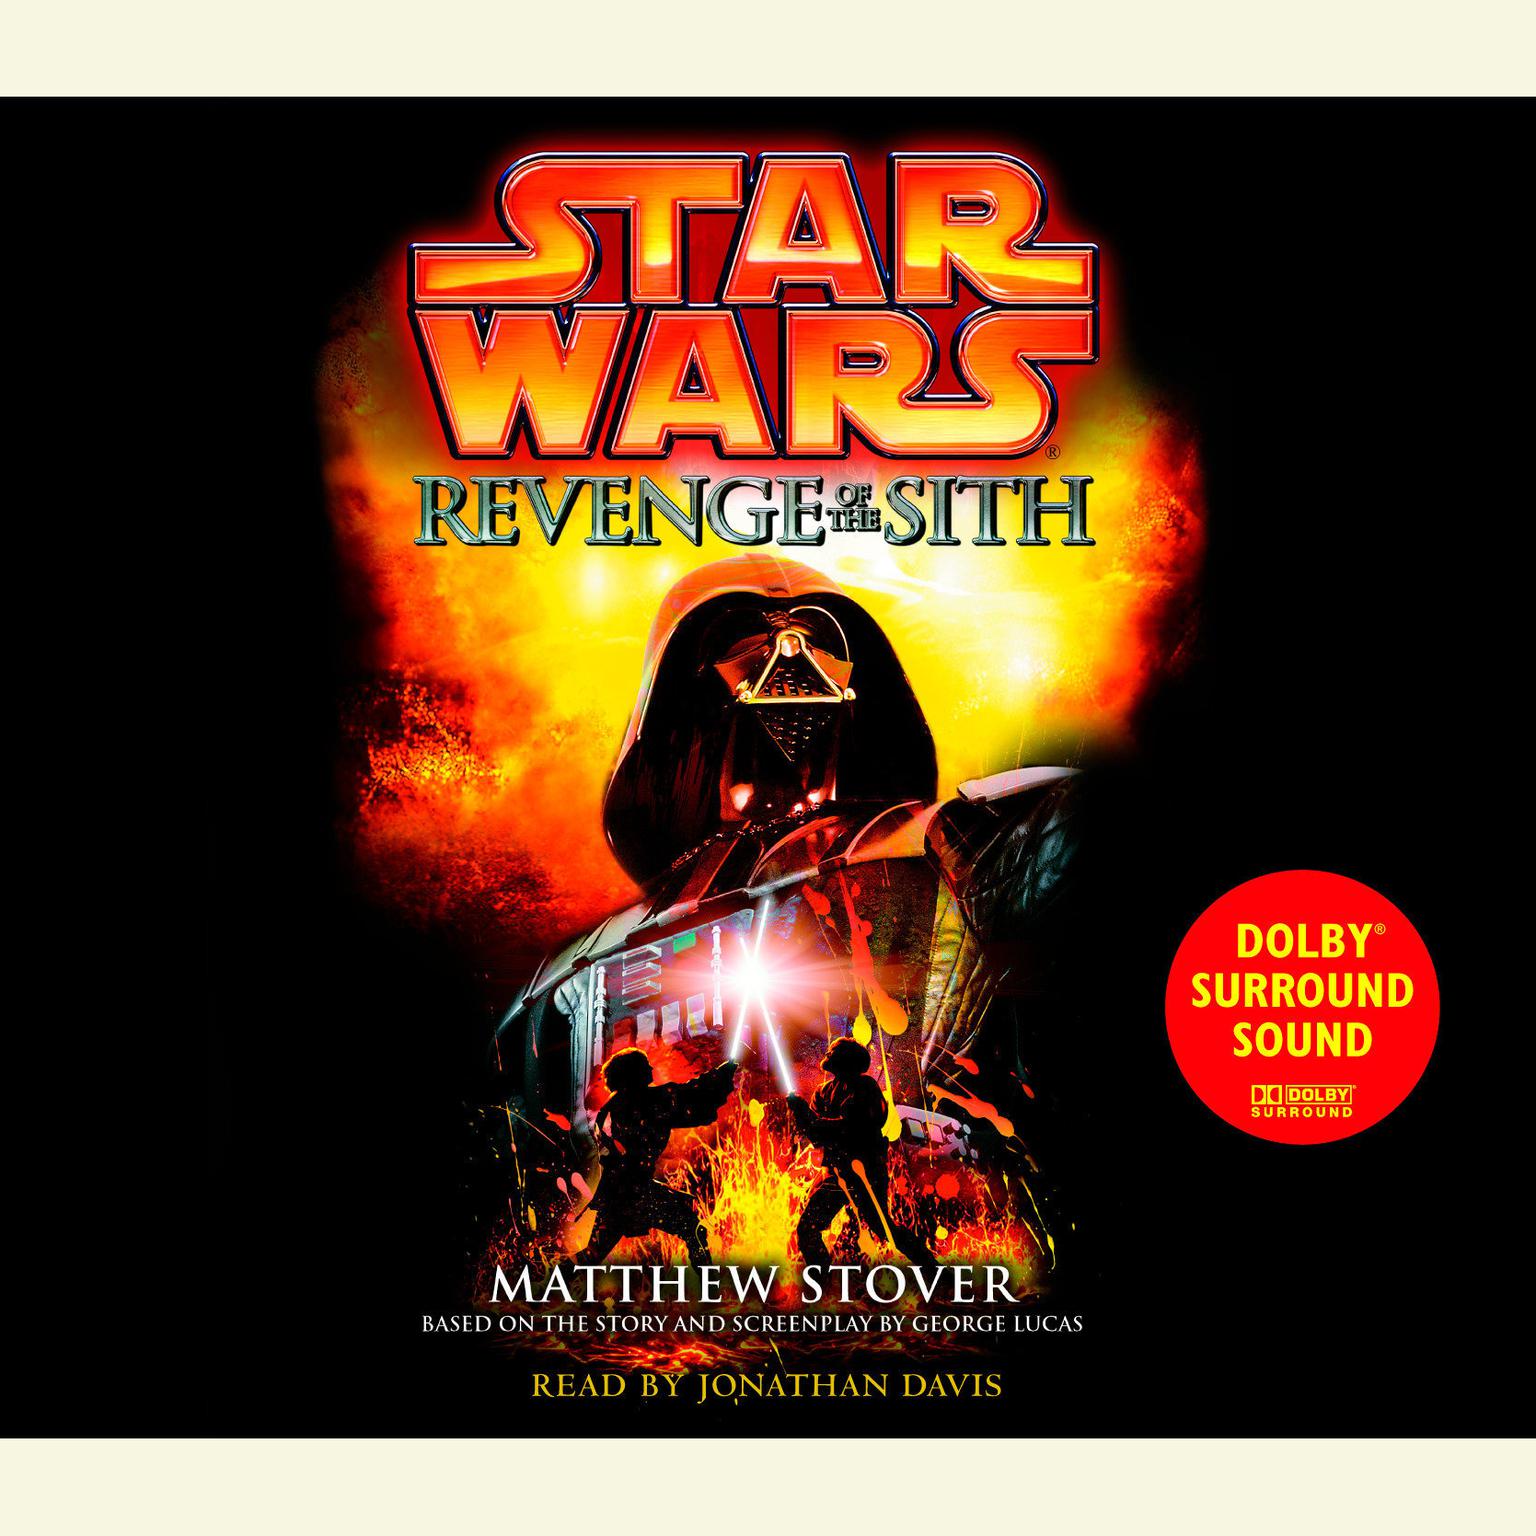 Star Wars: Episode III: Revenge of the Sith (Abridged) Audiobook, by Matthew Stover